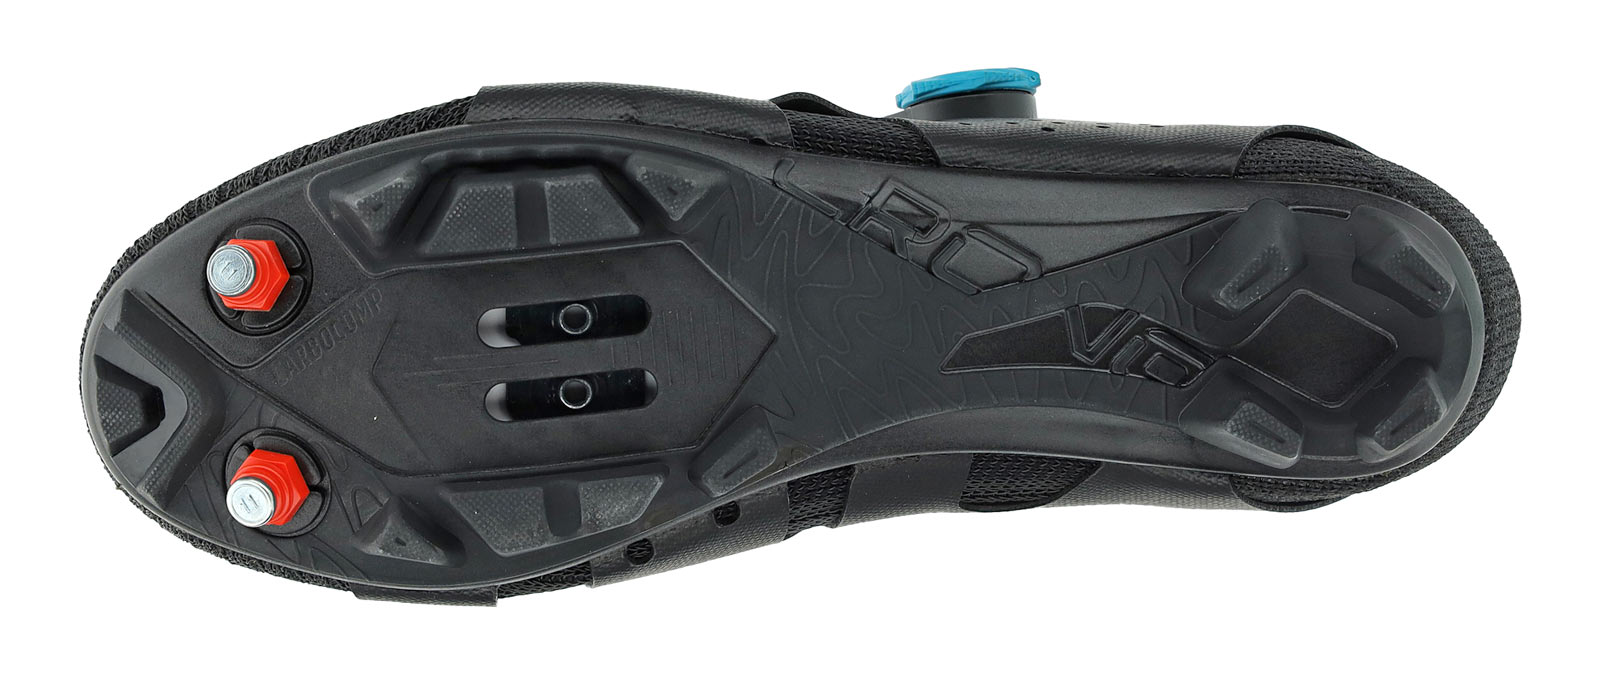 UYN Naked MTB shoes, natural fiber recycled sock-like breathable knit off-road cycling shoe, carbon-reinforced sole